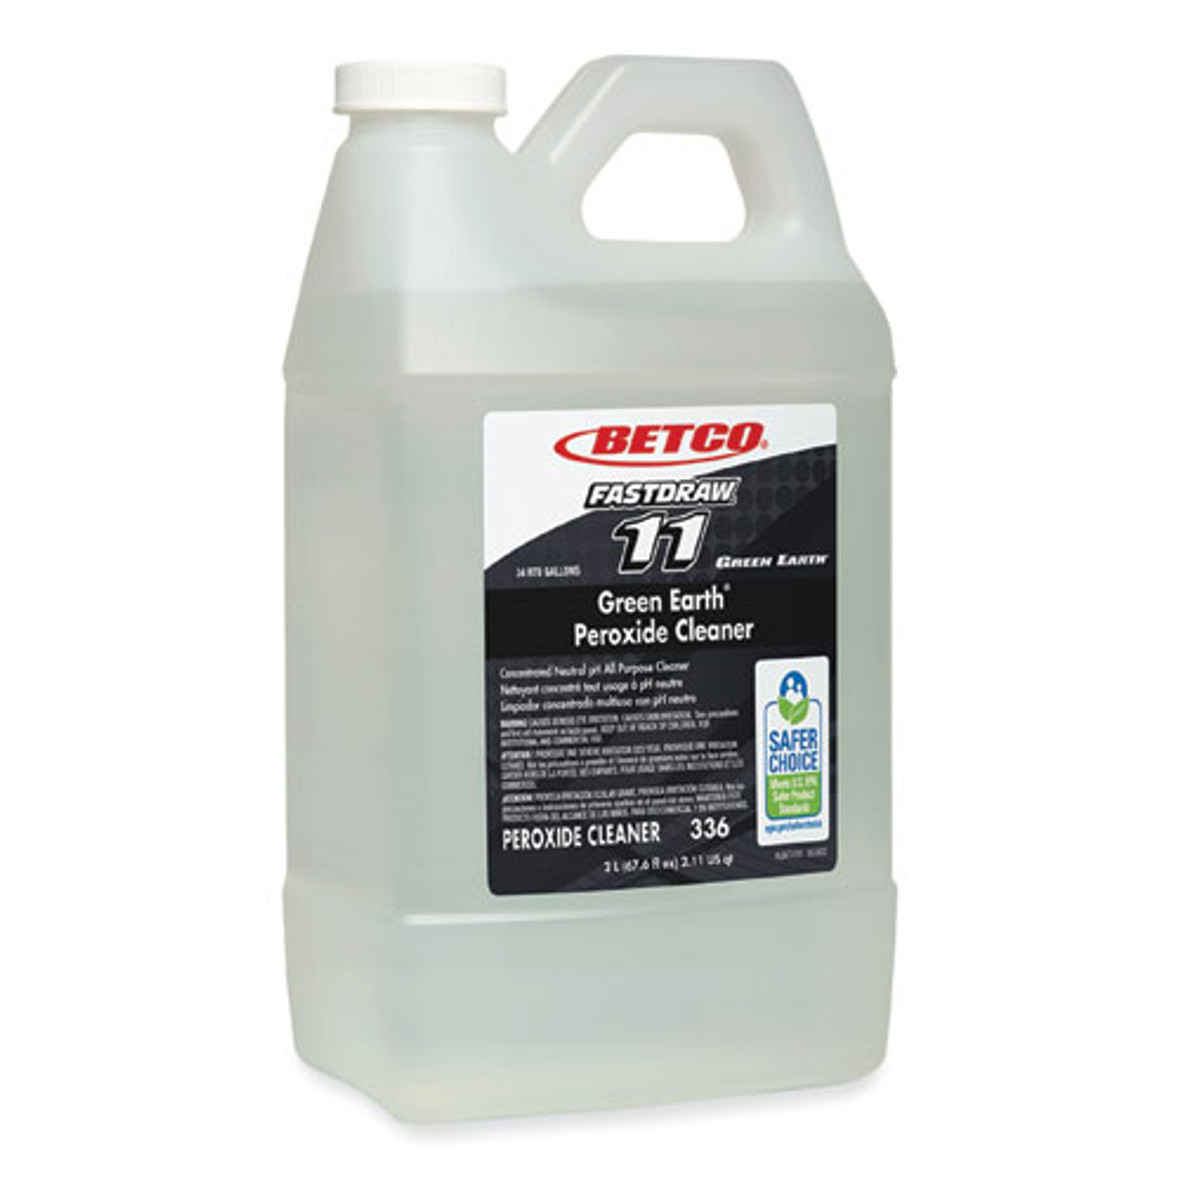 Betco Green Earth Peroxide Cleaner, Fresh Mint Scent, 2 L Bottle, 4/carton